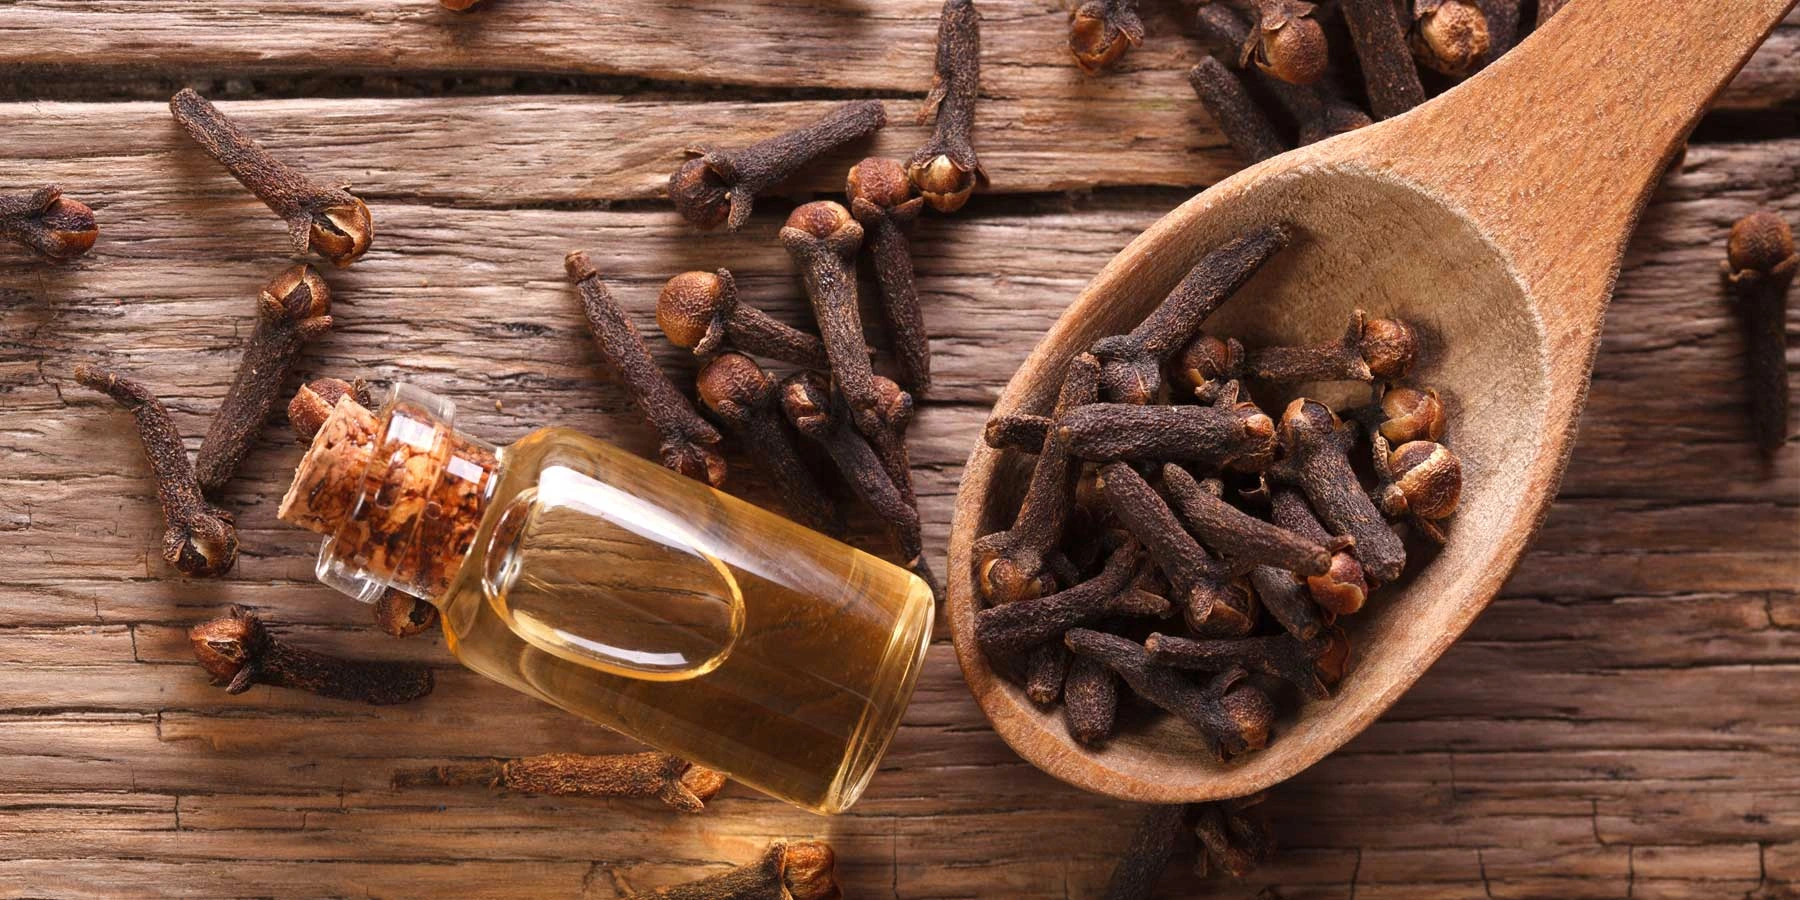 Benefits and Uses of Clove Essential Oil